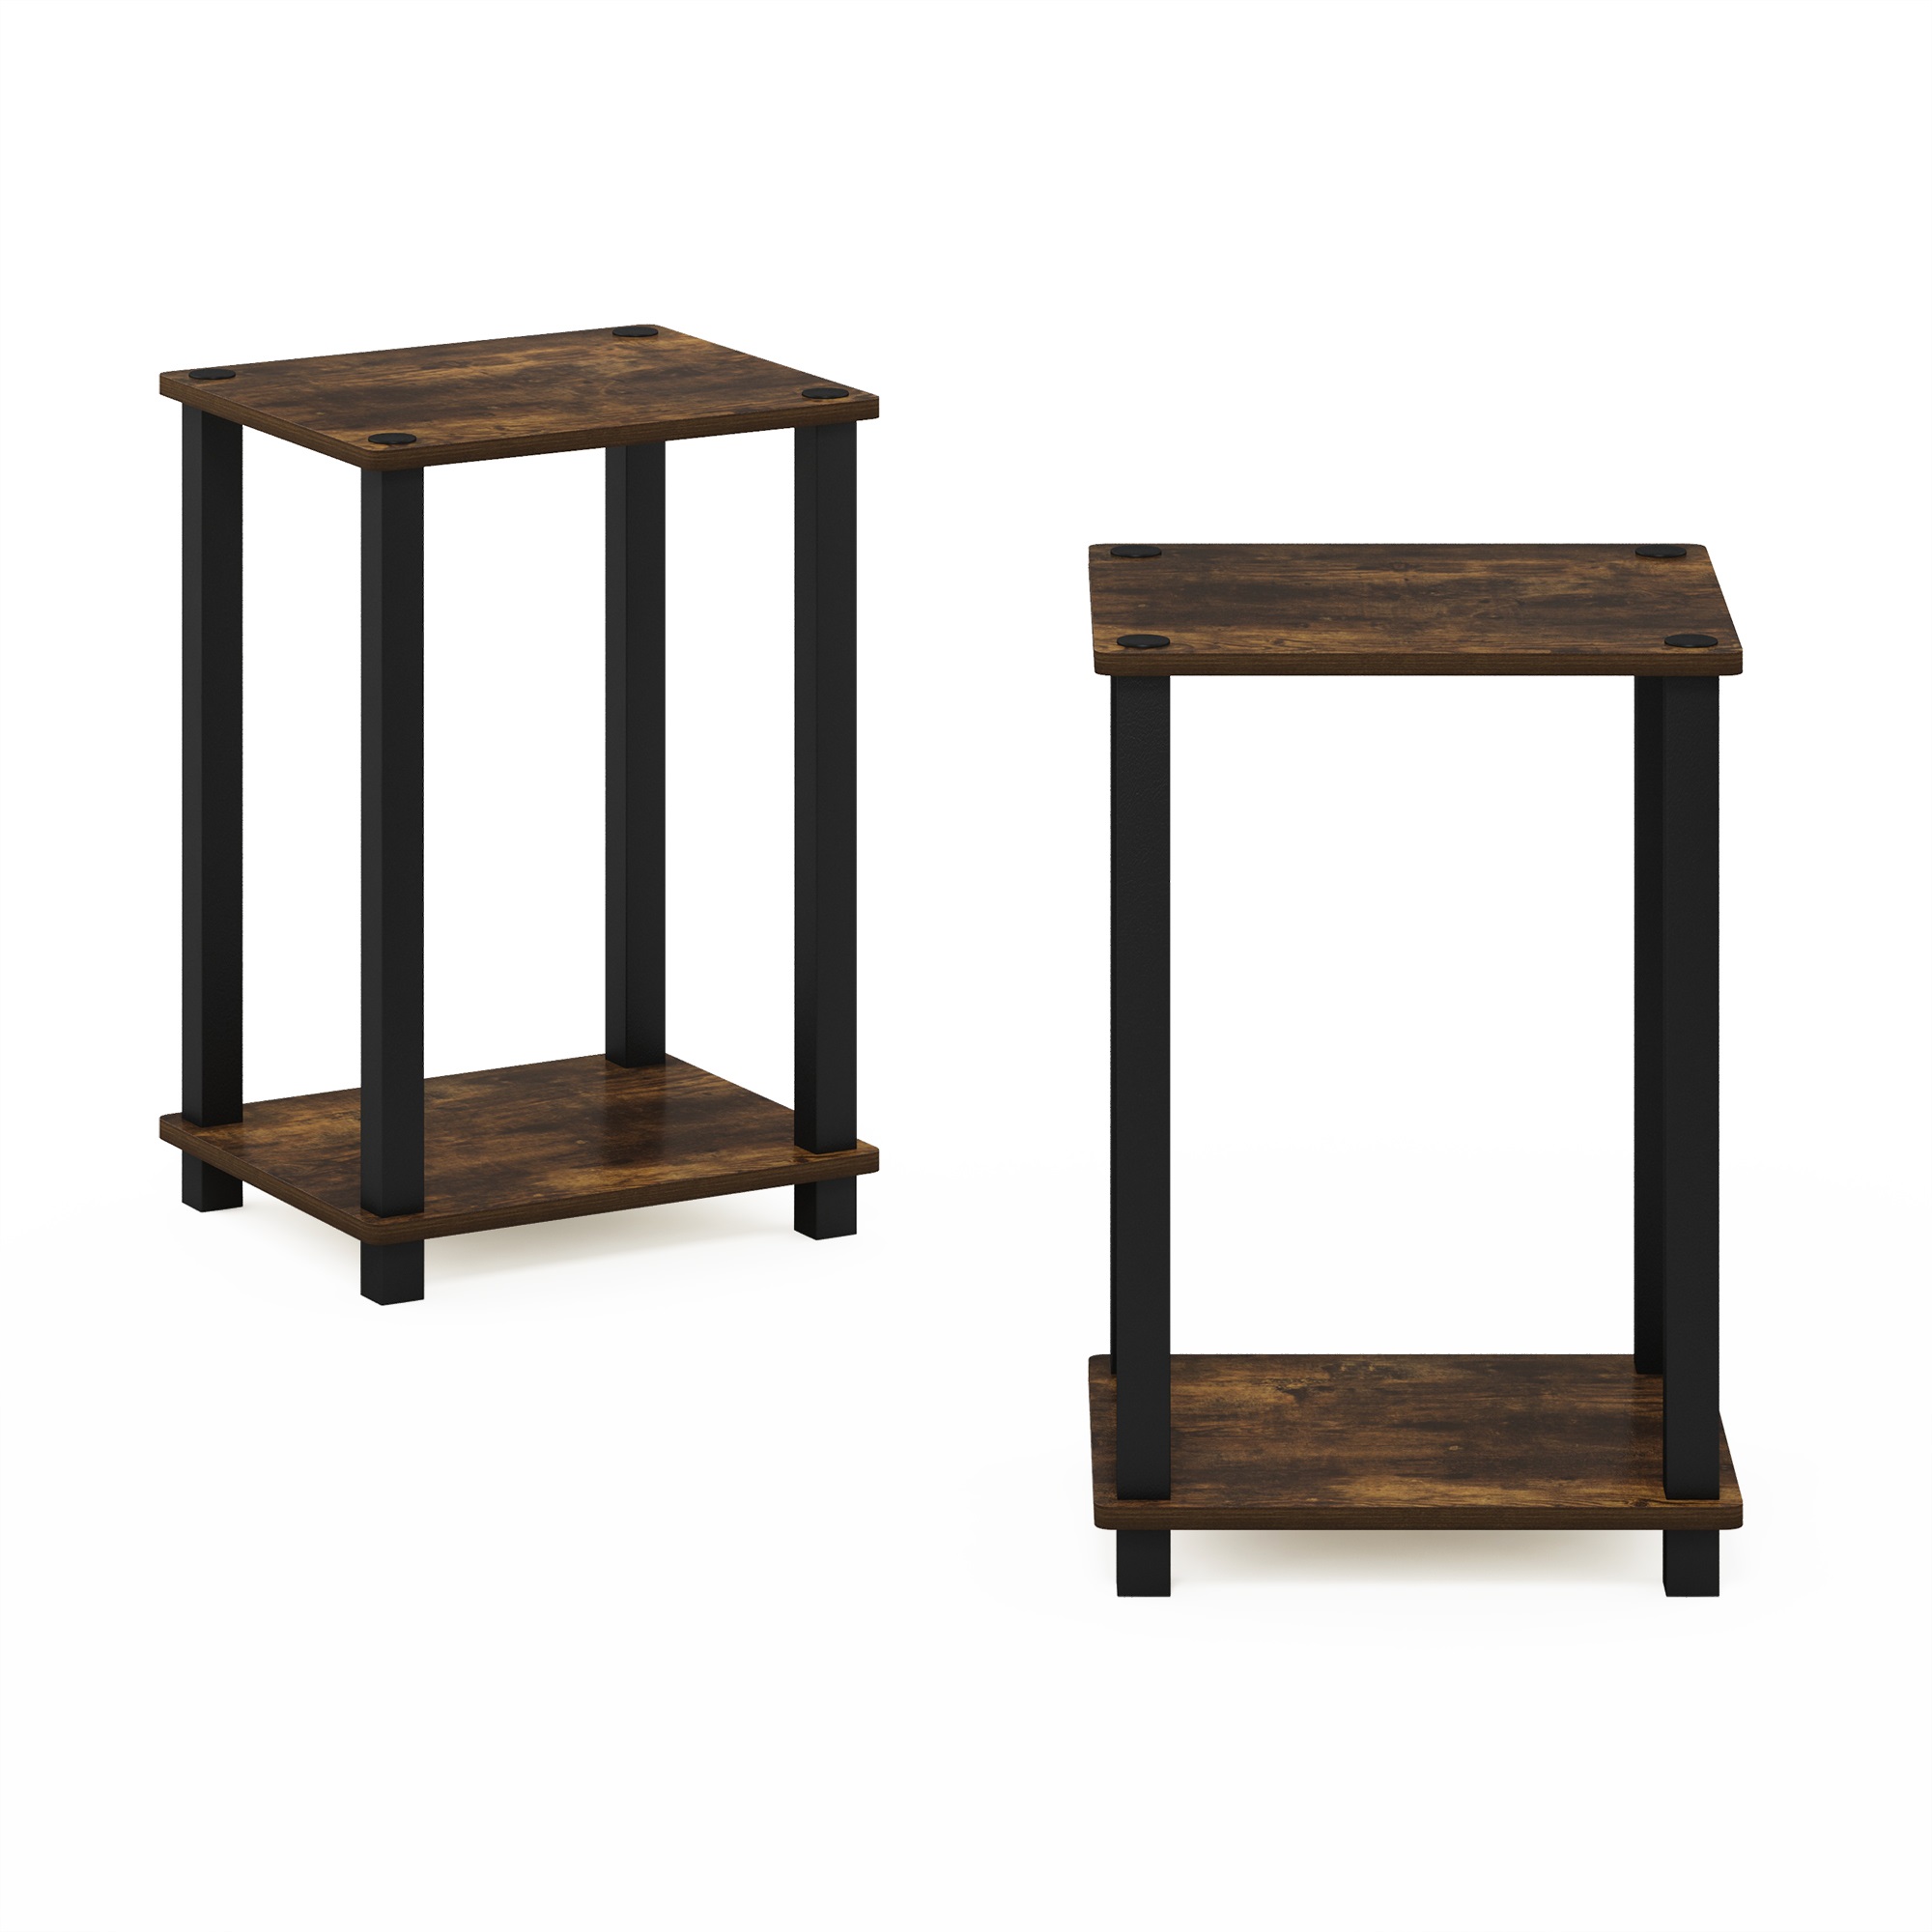 Furinno Simplistic End Table, Small, Set of 2, Amber Pine/Black